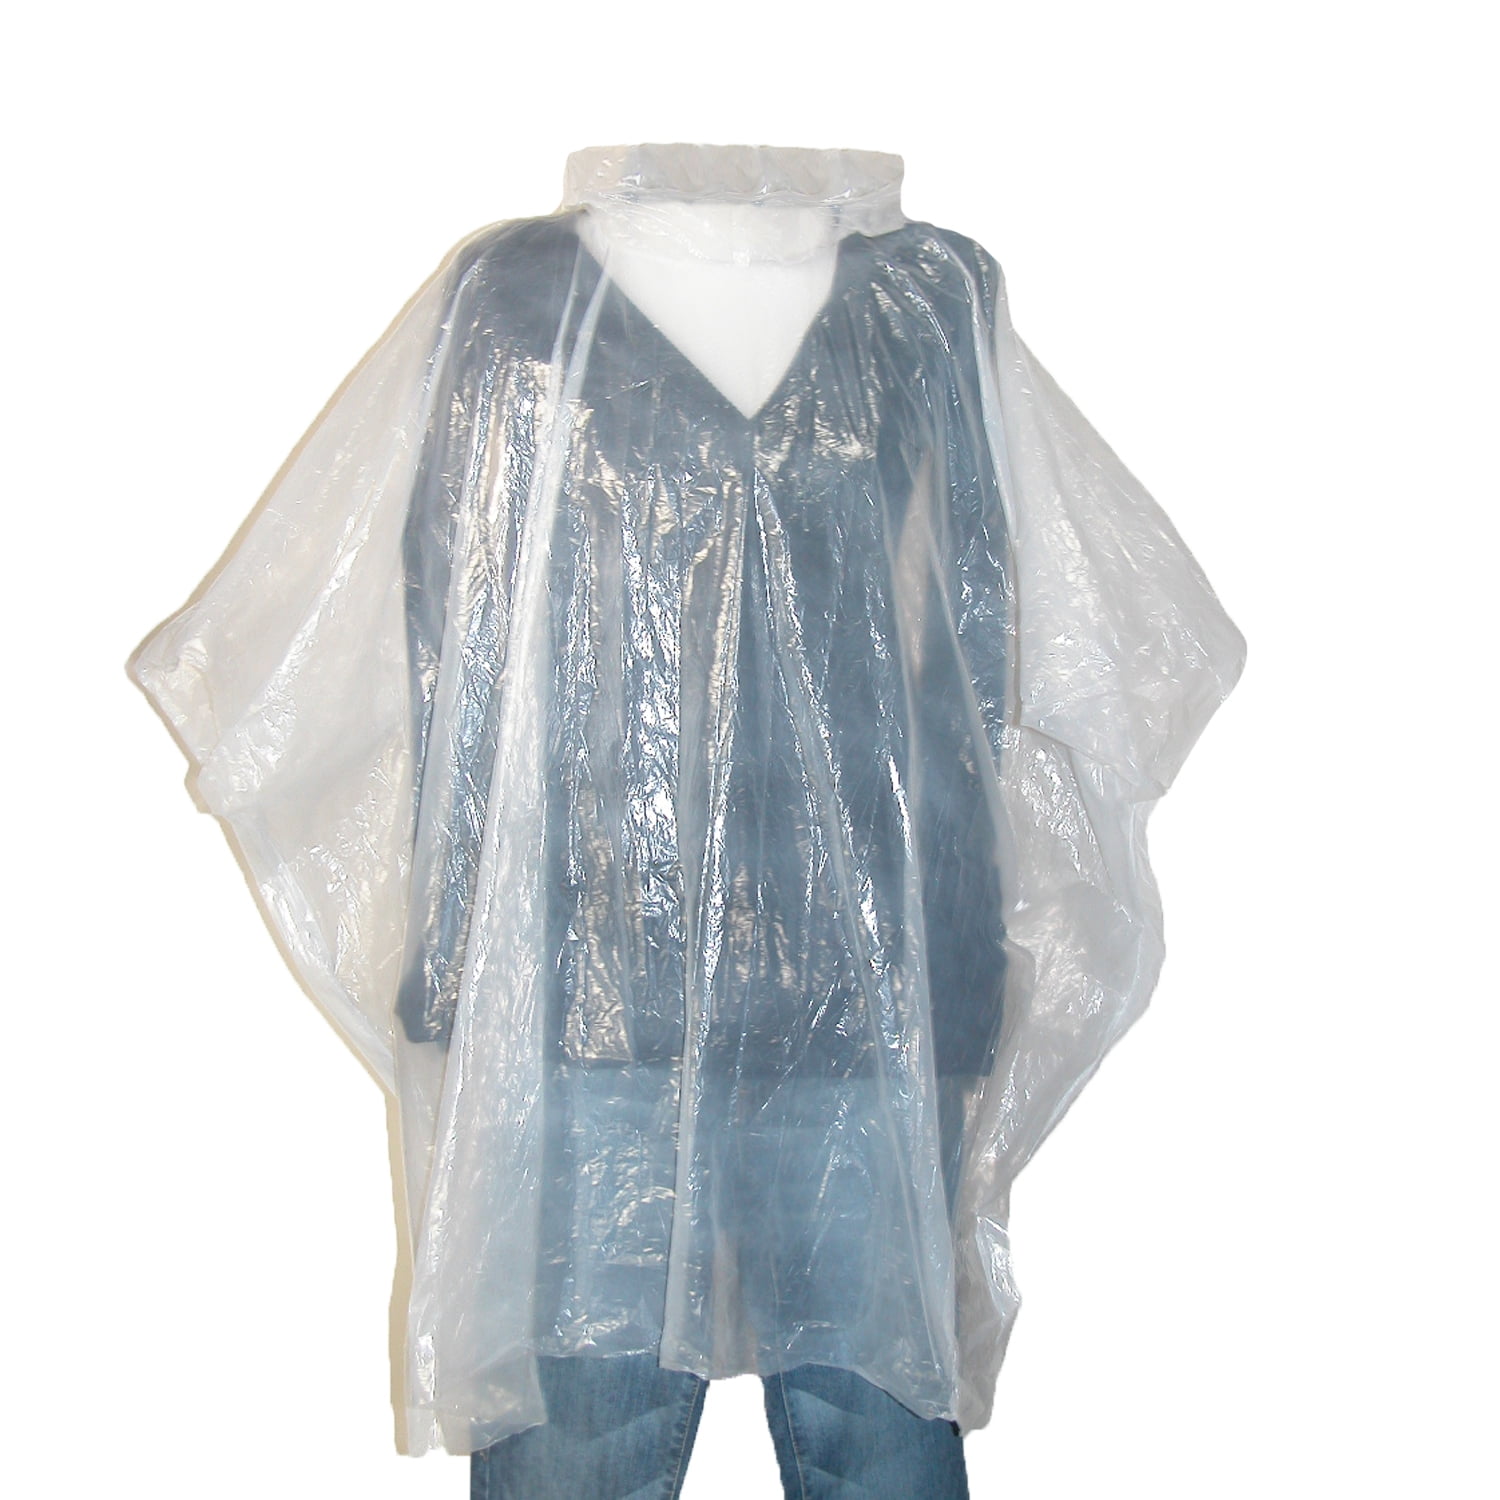 Summit Adult Emergency Poncho 50X80" In Pouch W/Insert Clipstp 